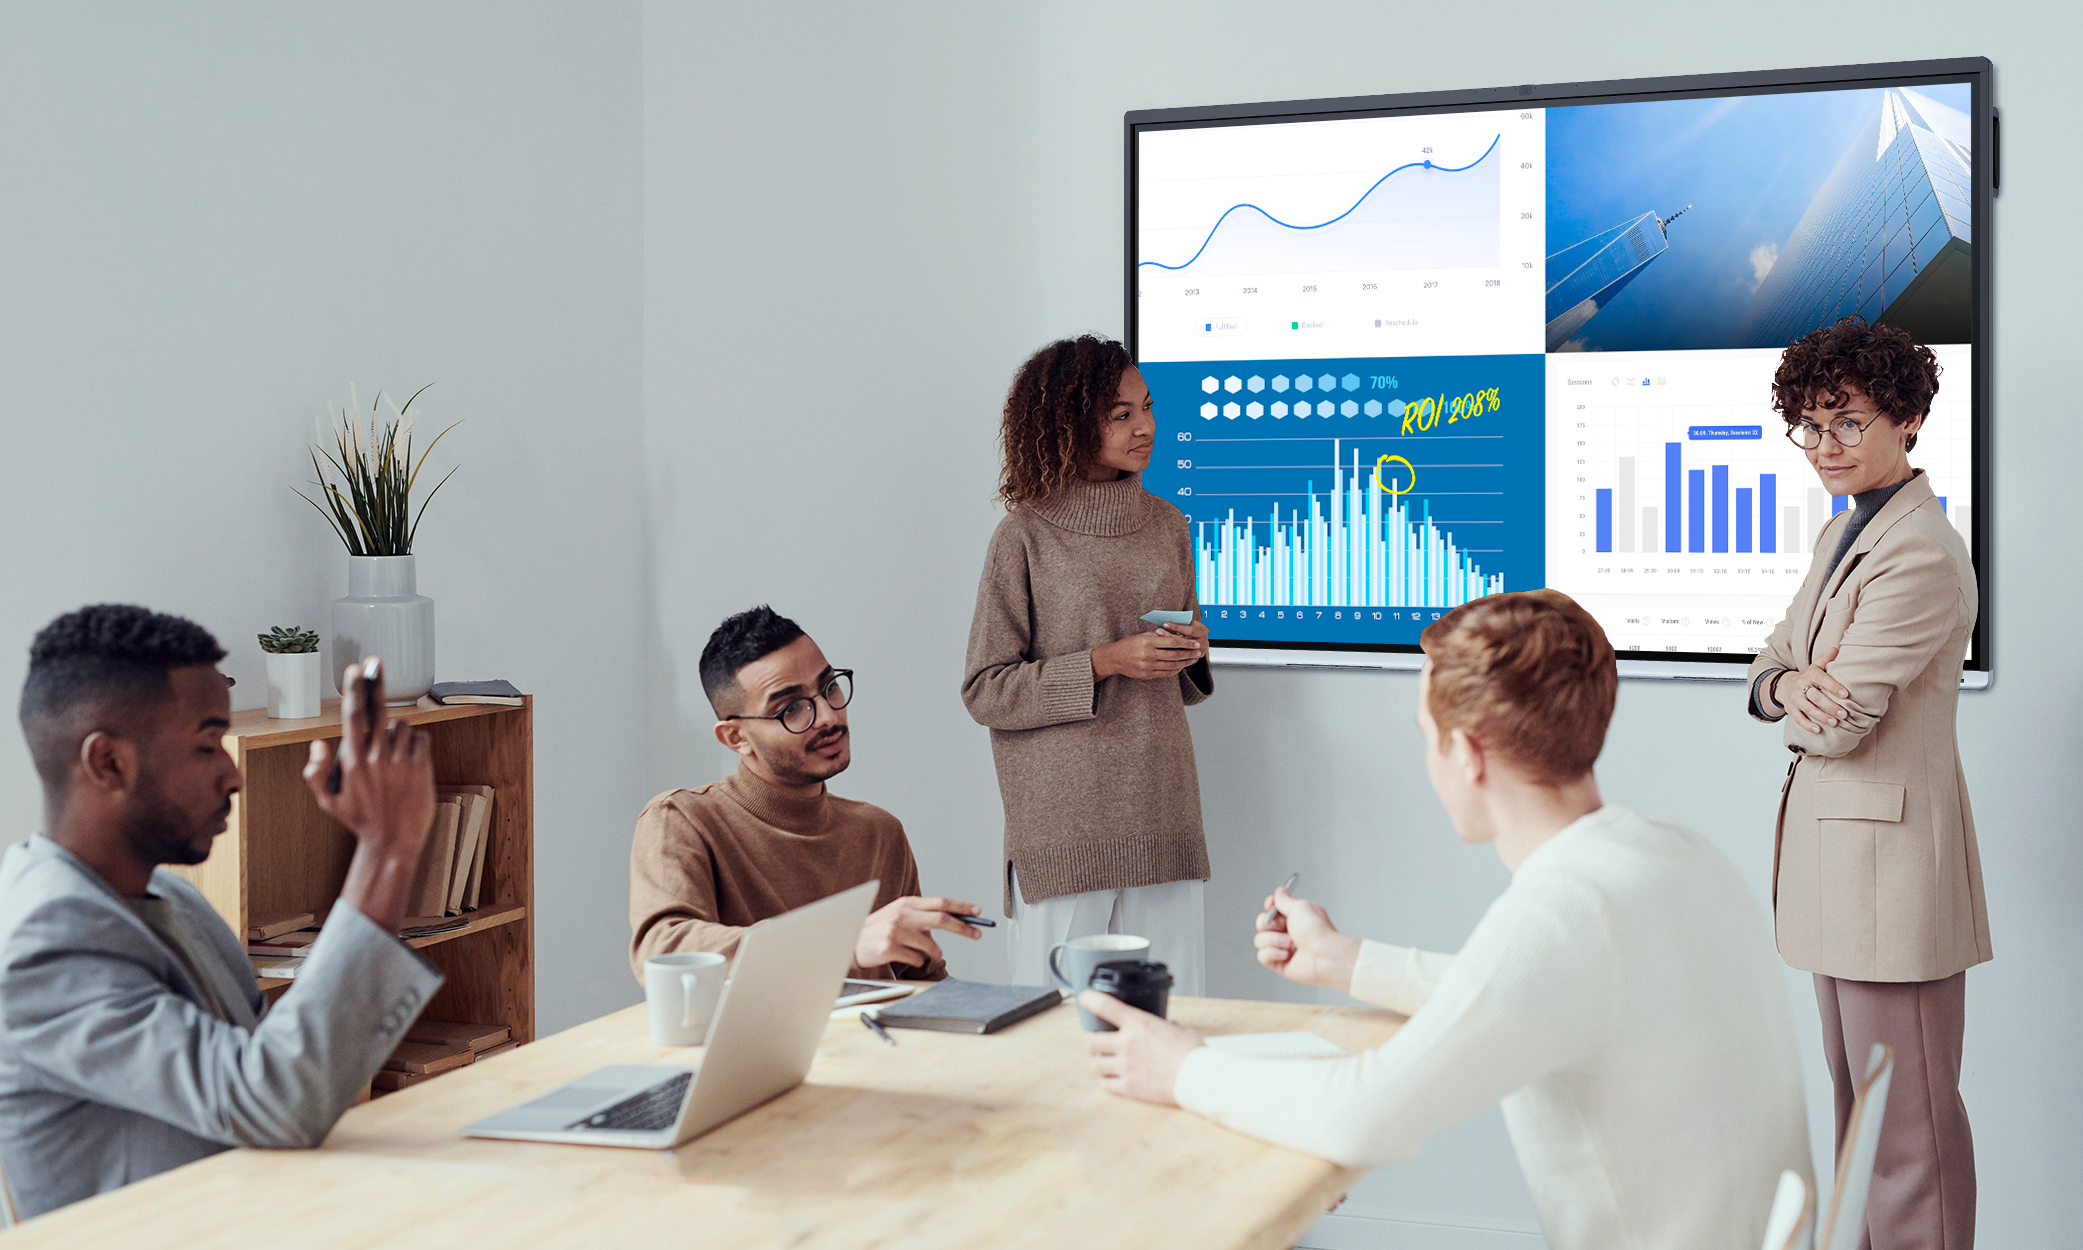 Why All-in-One Displays Make Video Conferencing a Breeze